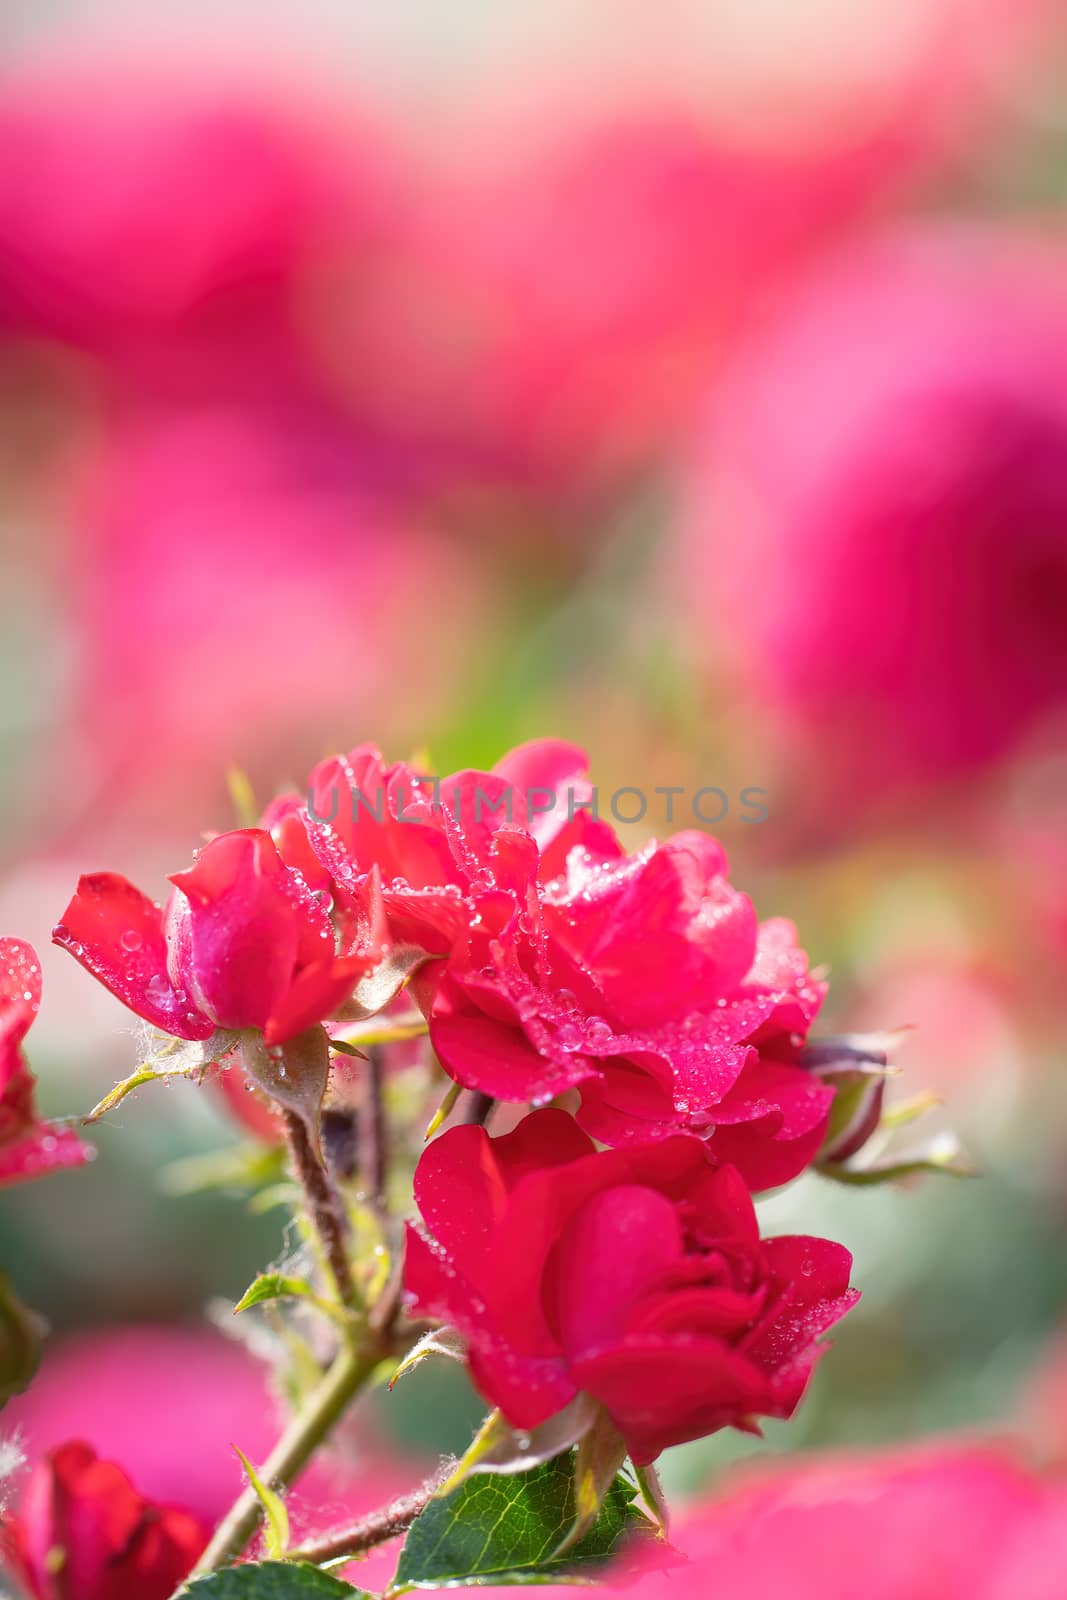 Red rose flower on a green blurred background.